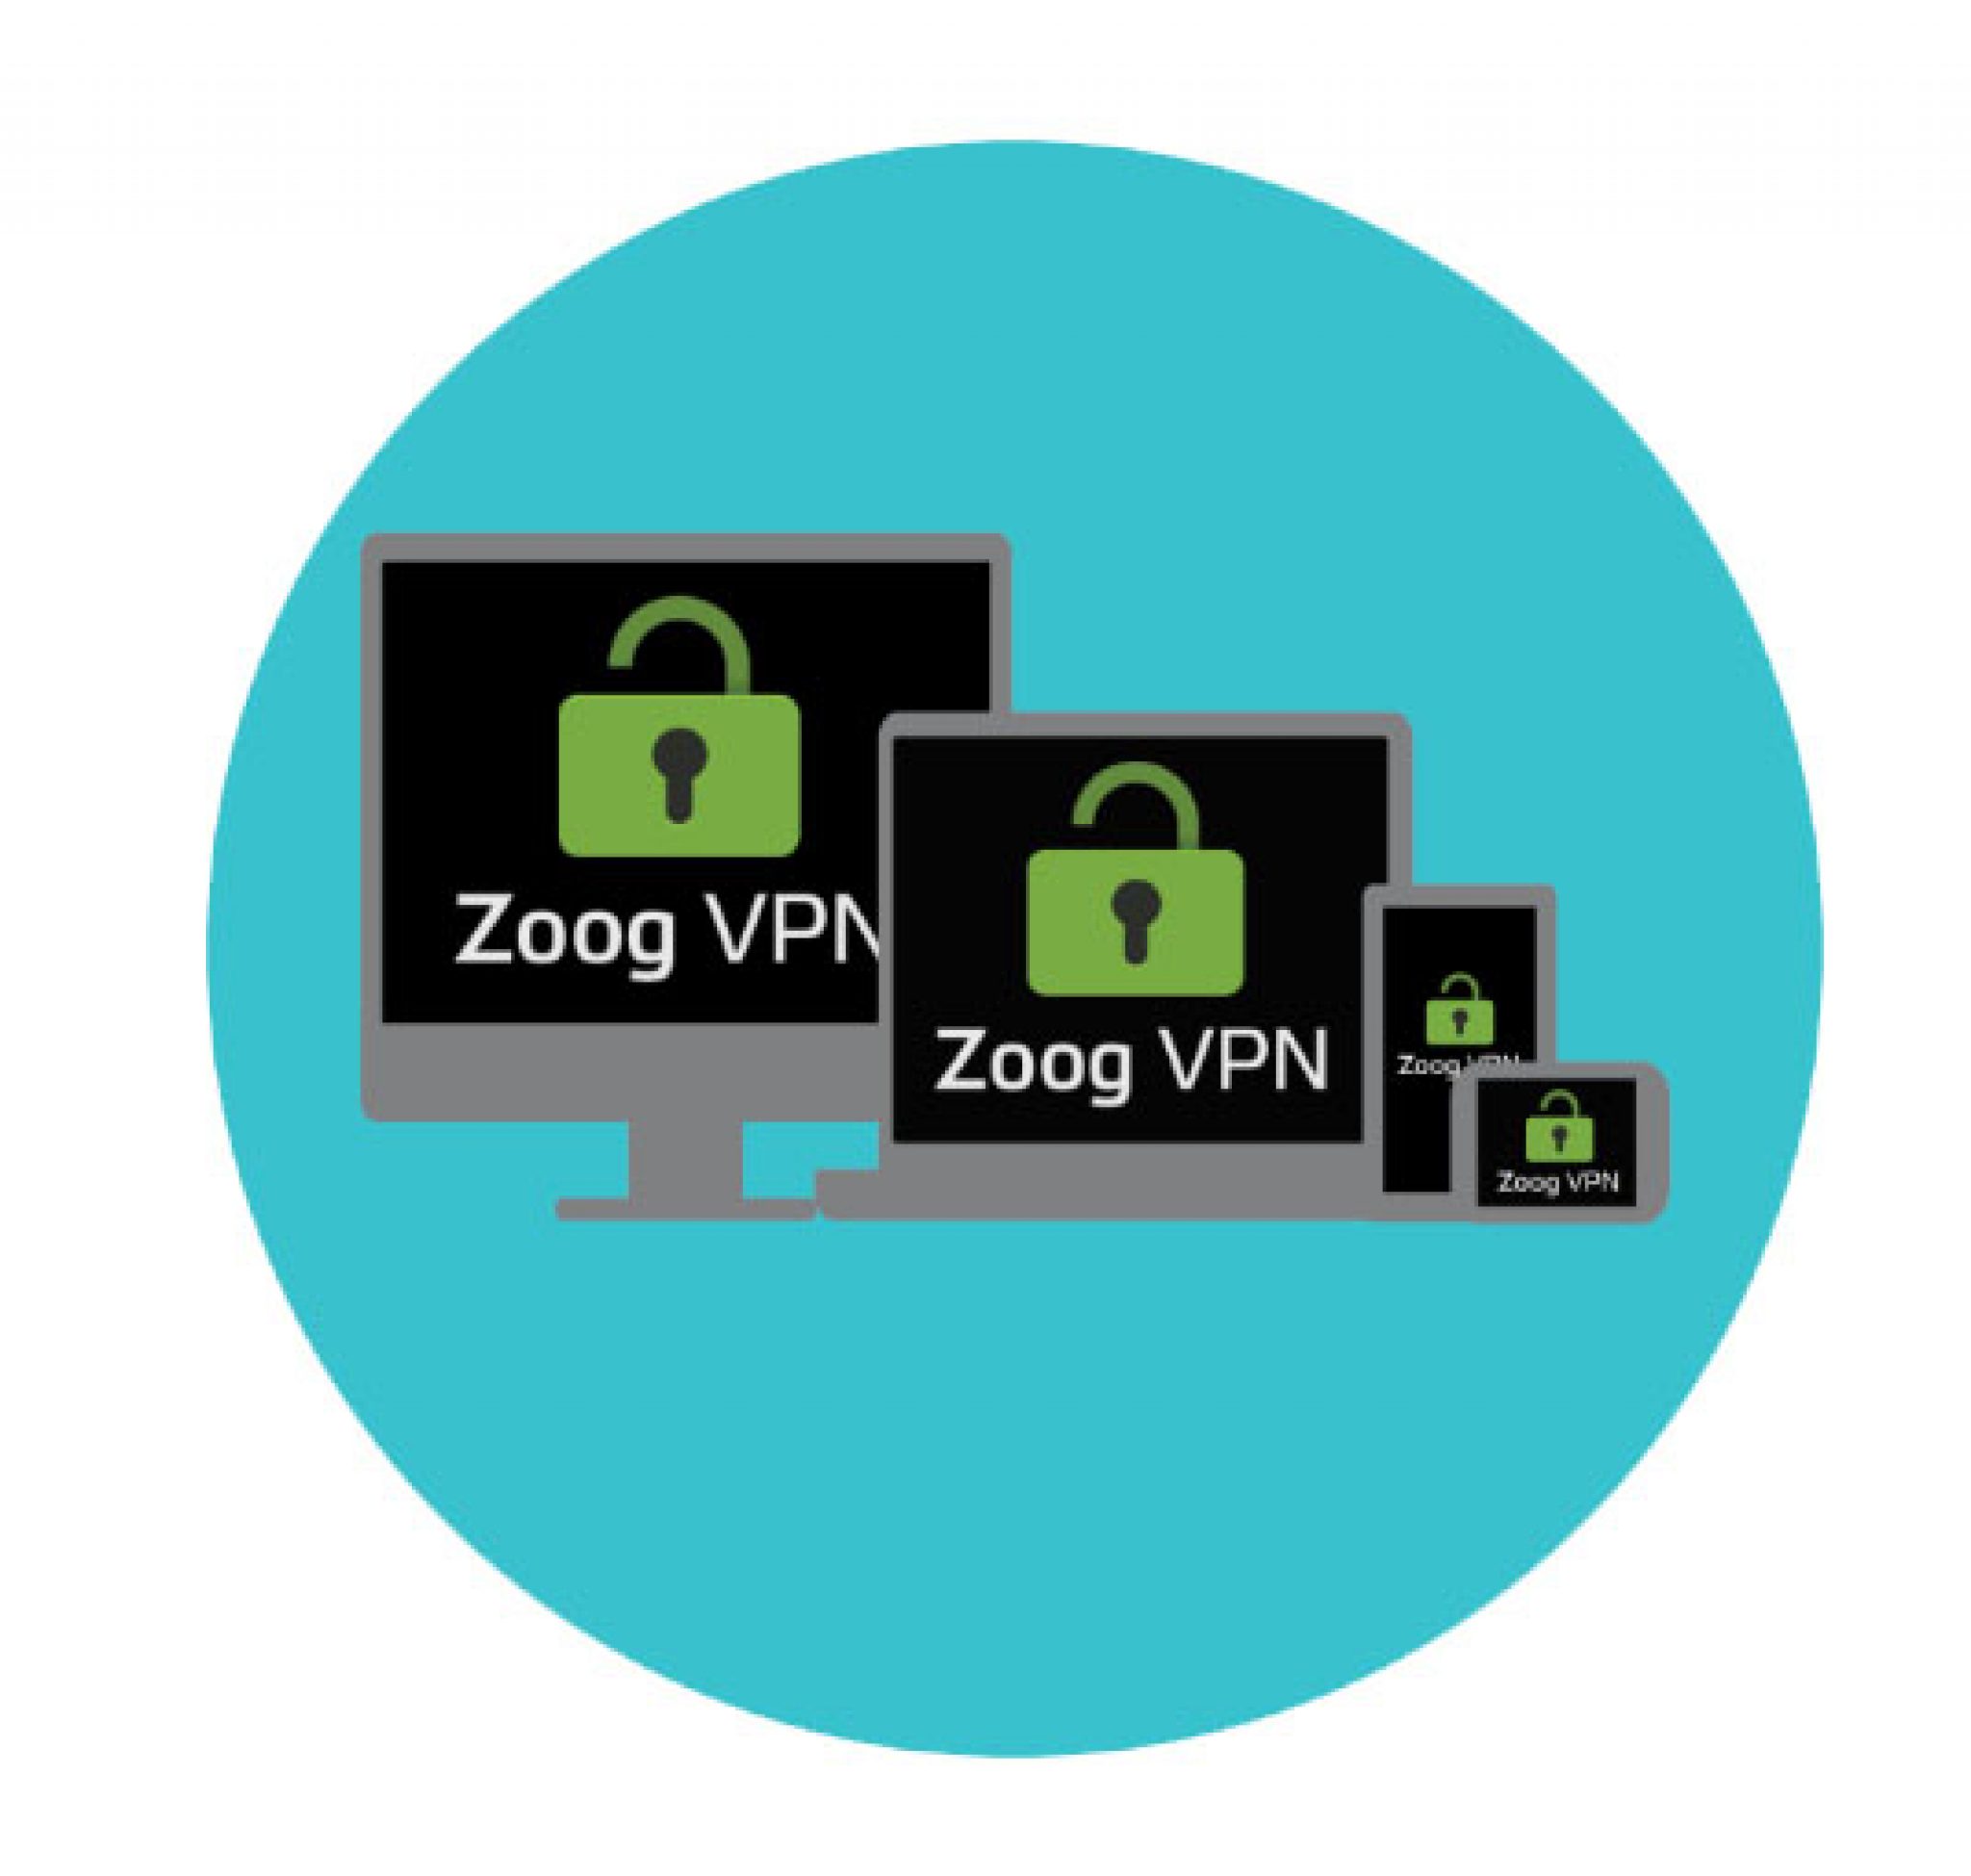 reviews about zoogvpn